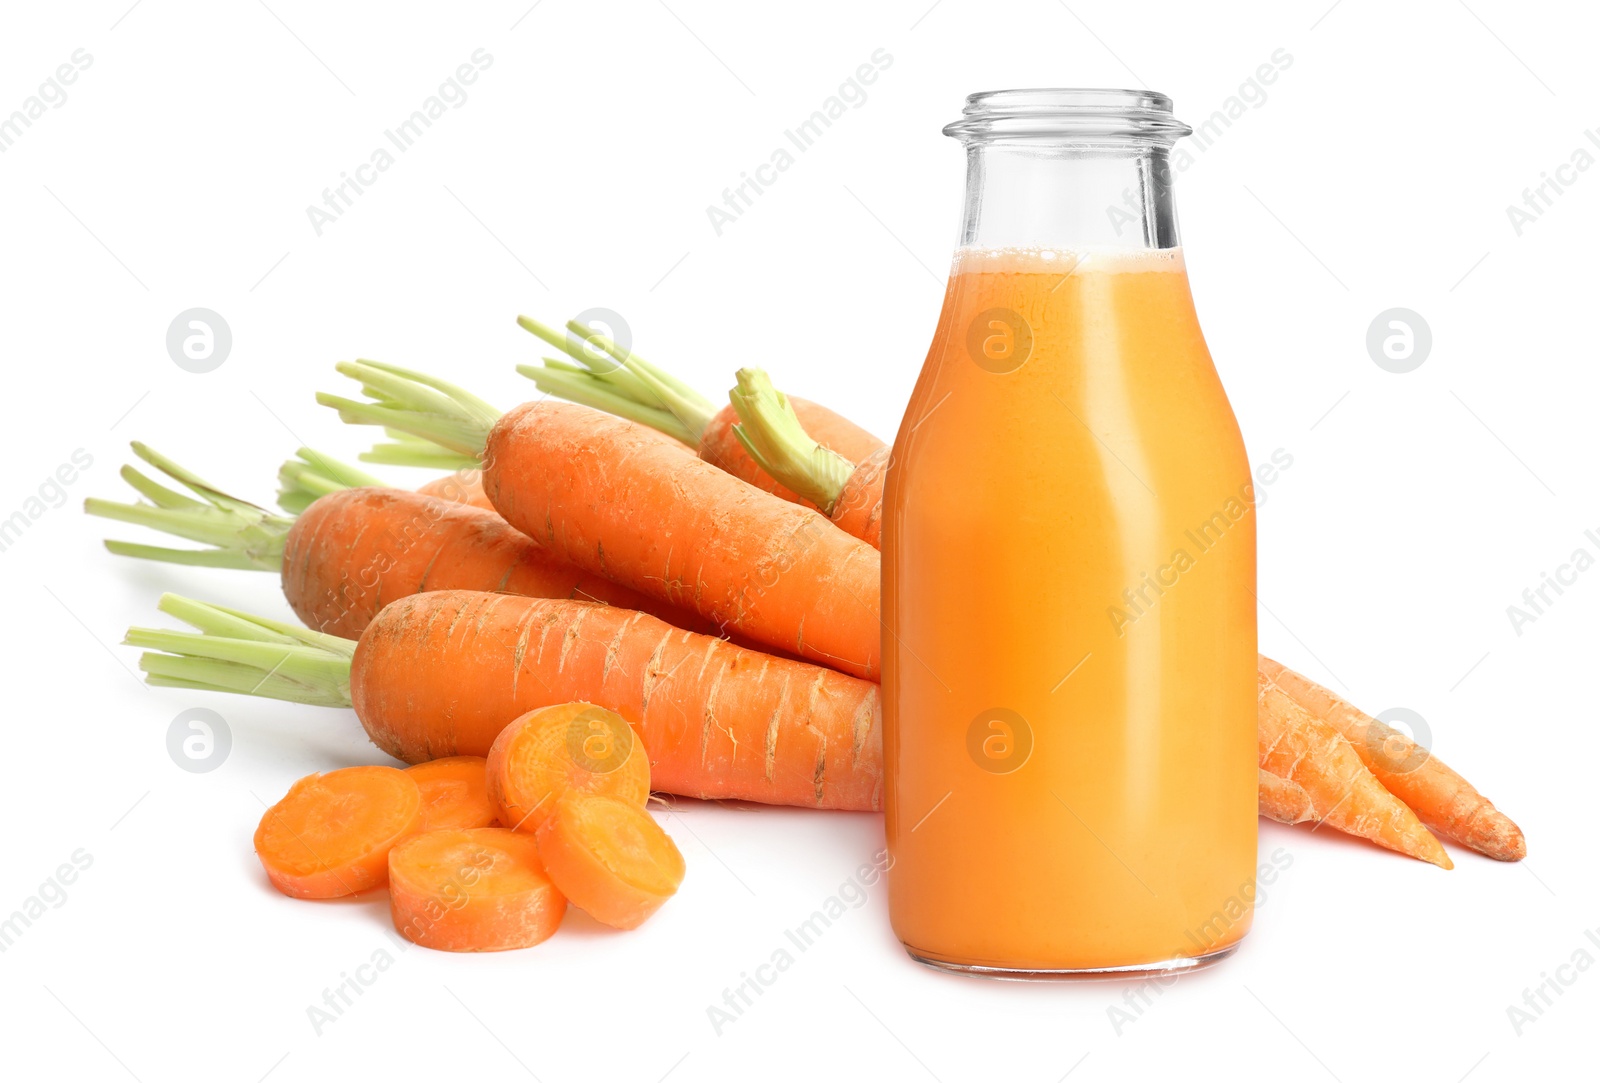 Image of Carrot juice and fresh vegetables on white background